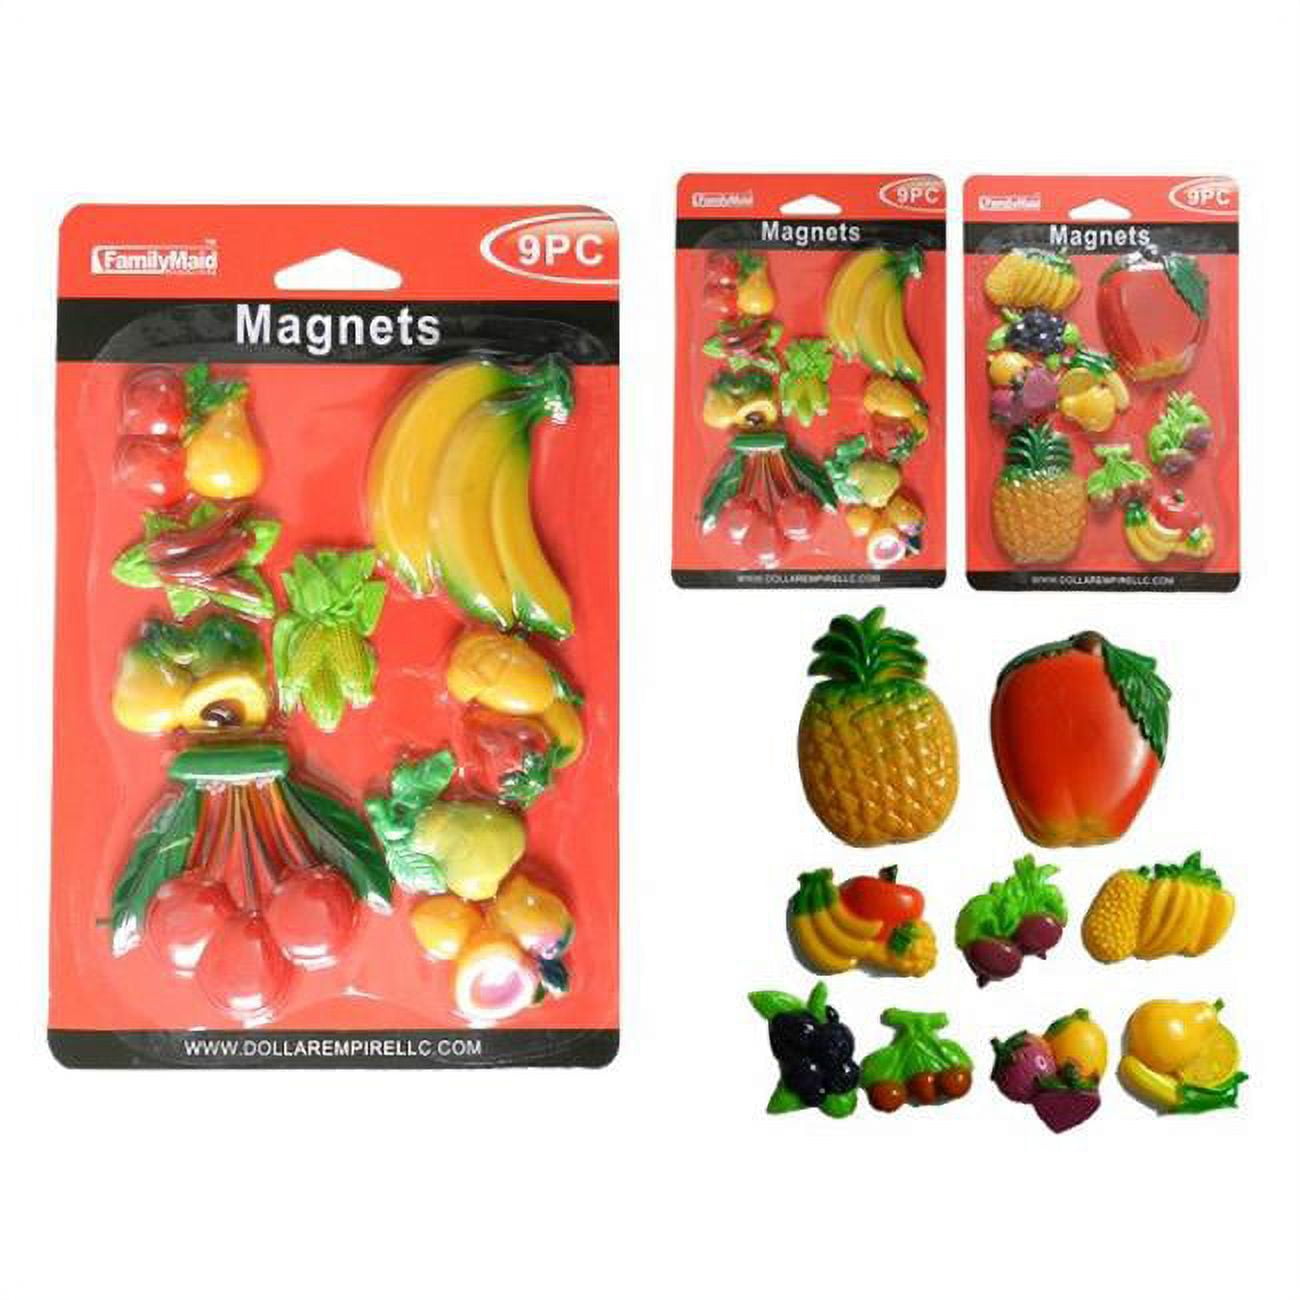 Picture of Family Maid 19067 Fruit Design Magnet - 9 Piece - Pack of 96